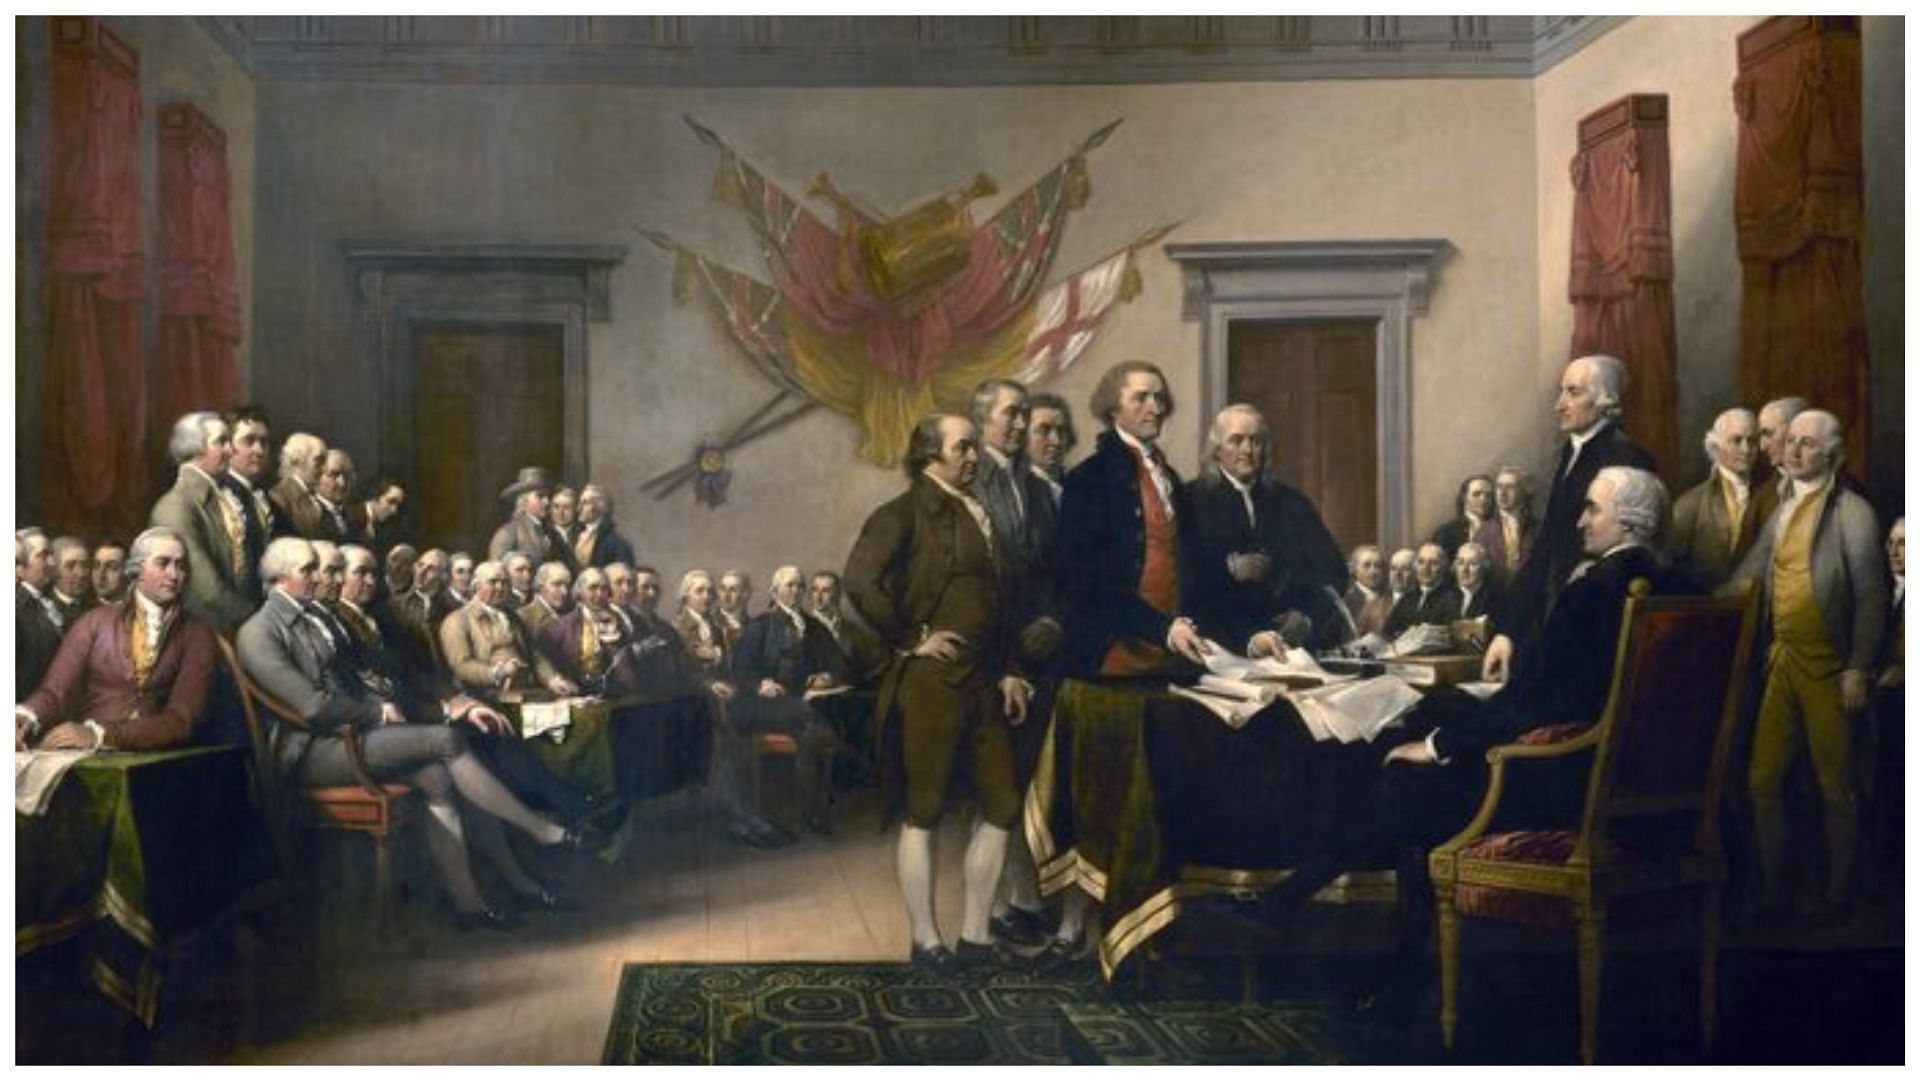 The Declaration of Independence was adopted on 4th of July, 1776 (image via Getty Images/Graphicaartis)